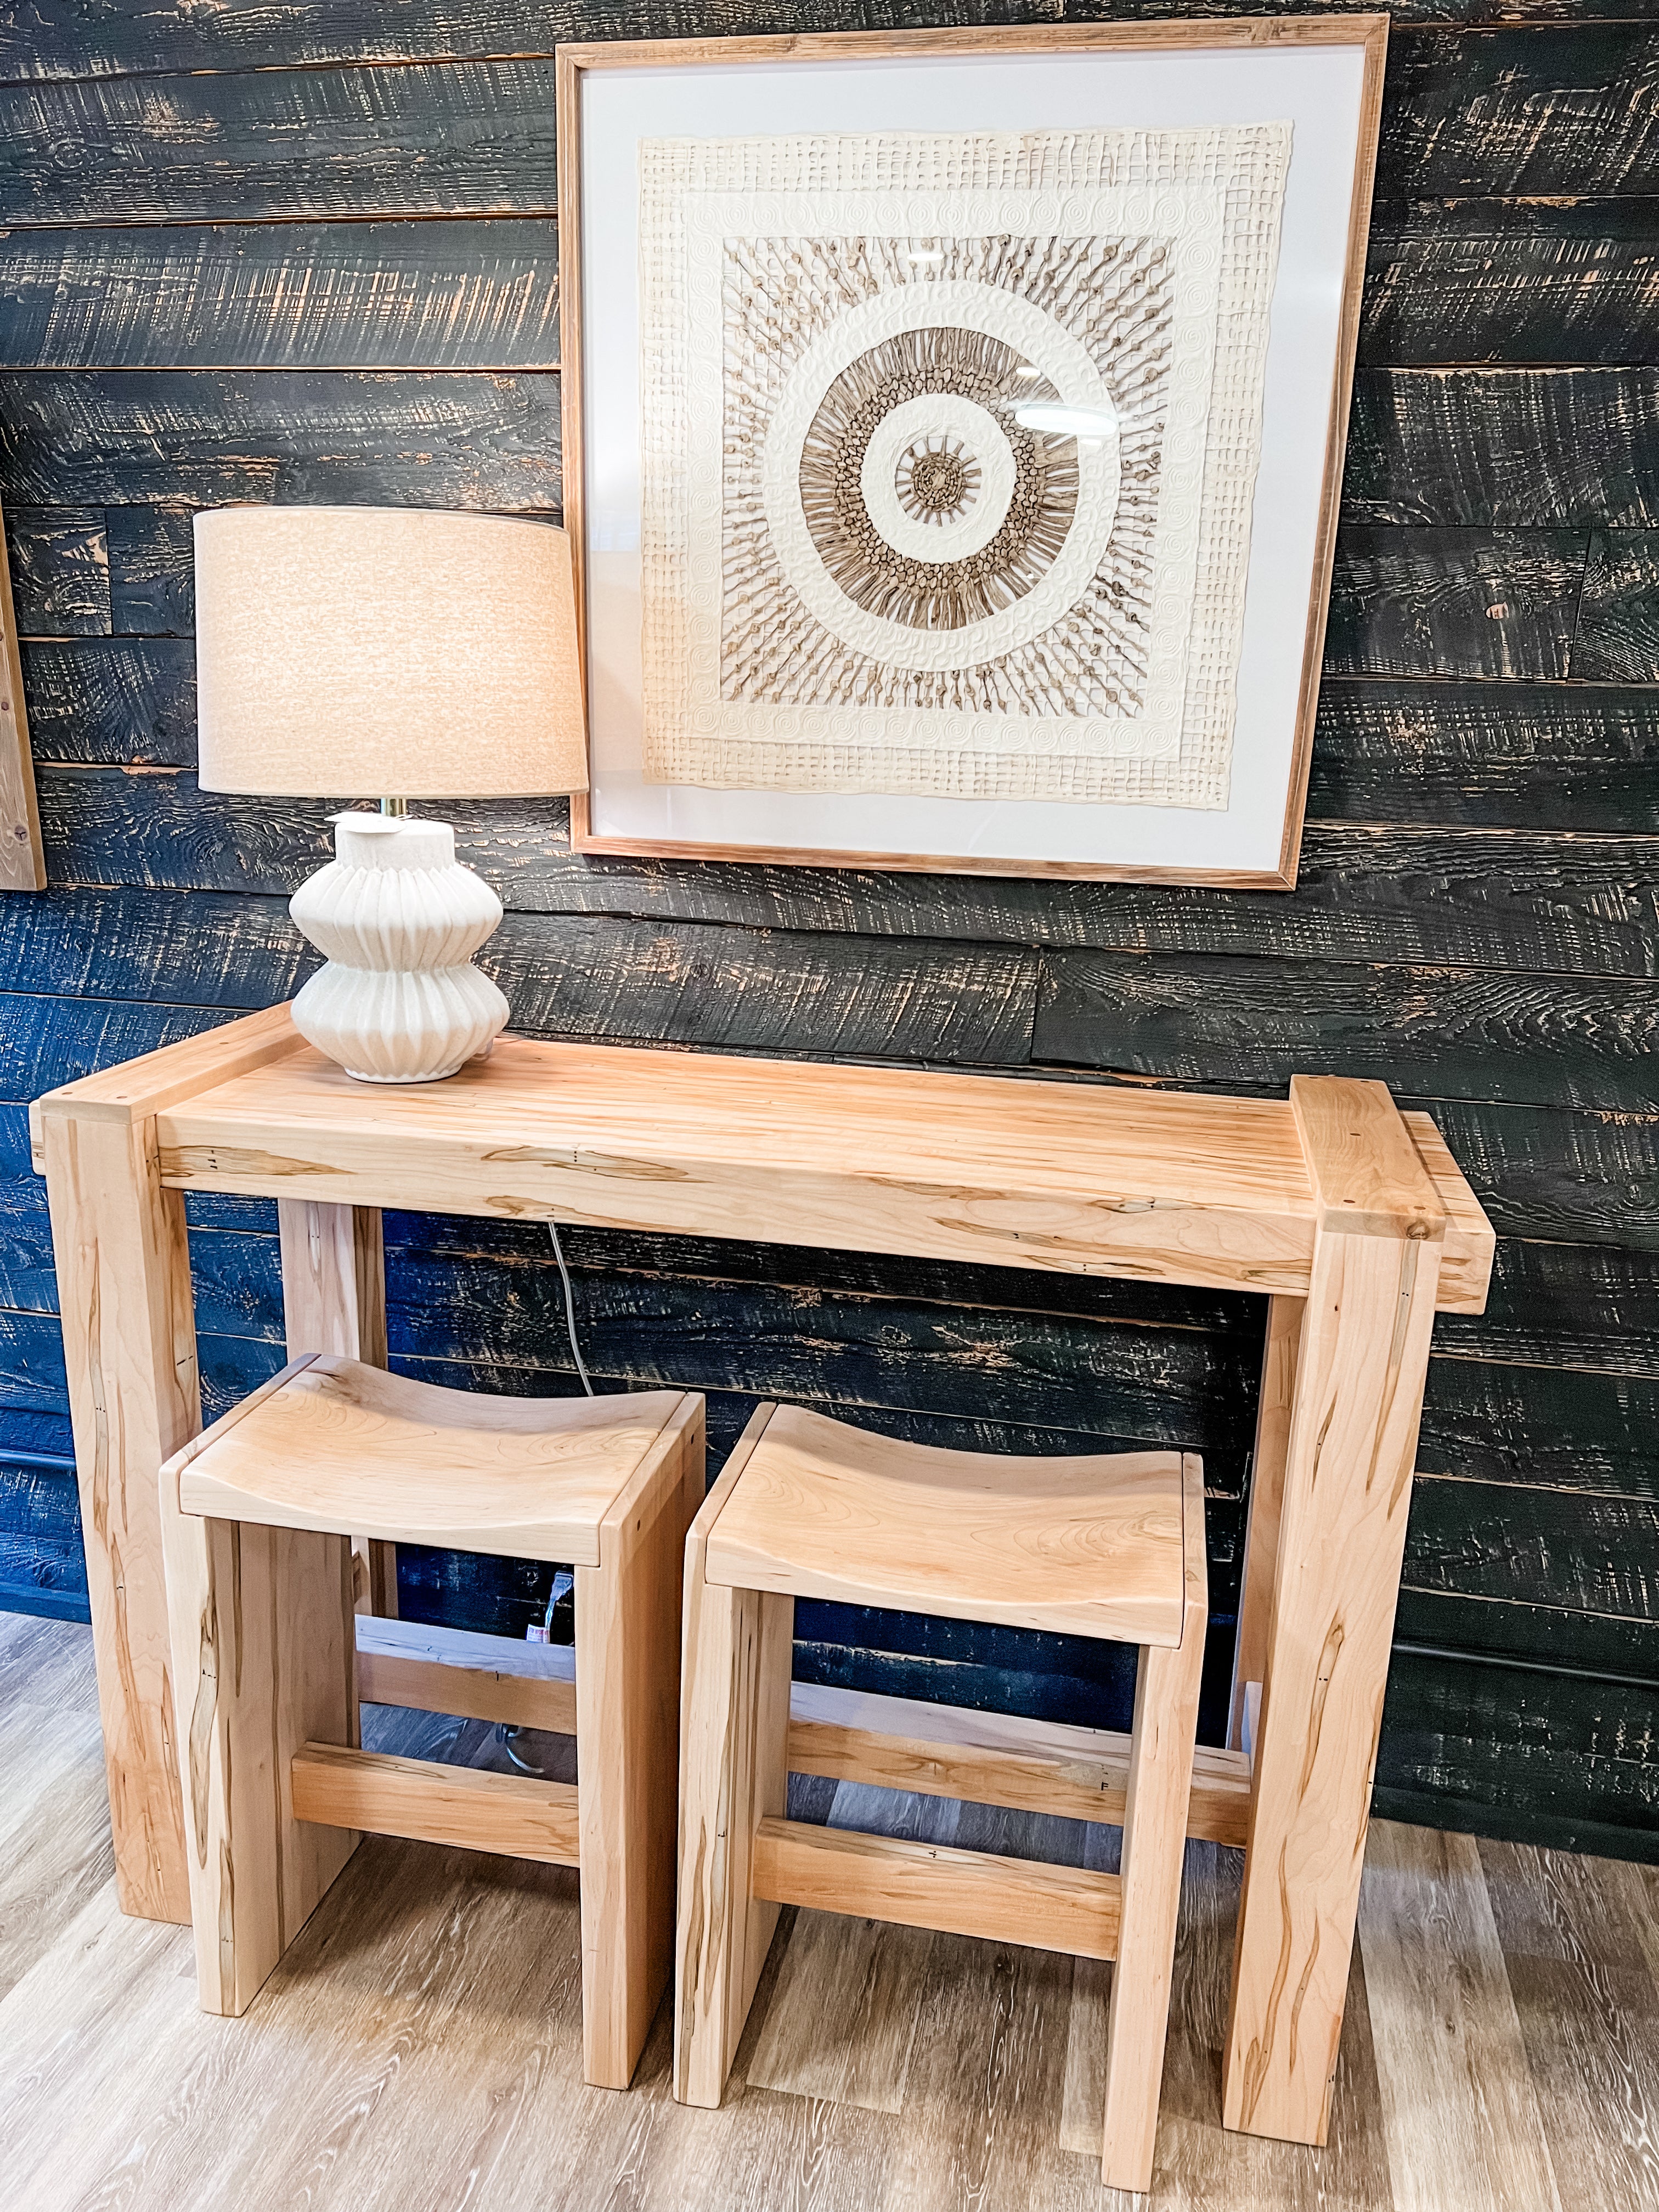 Maple wood sofa table with two stools hand-made the rustic barn ct